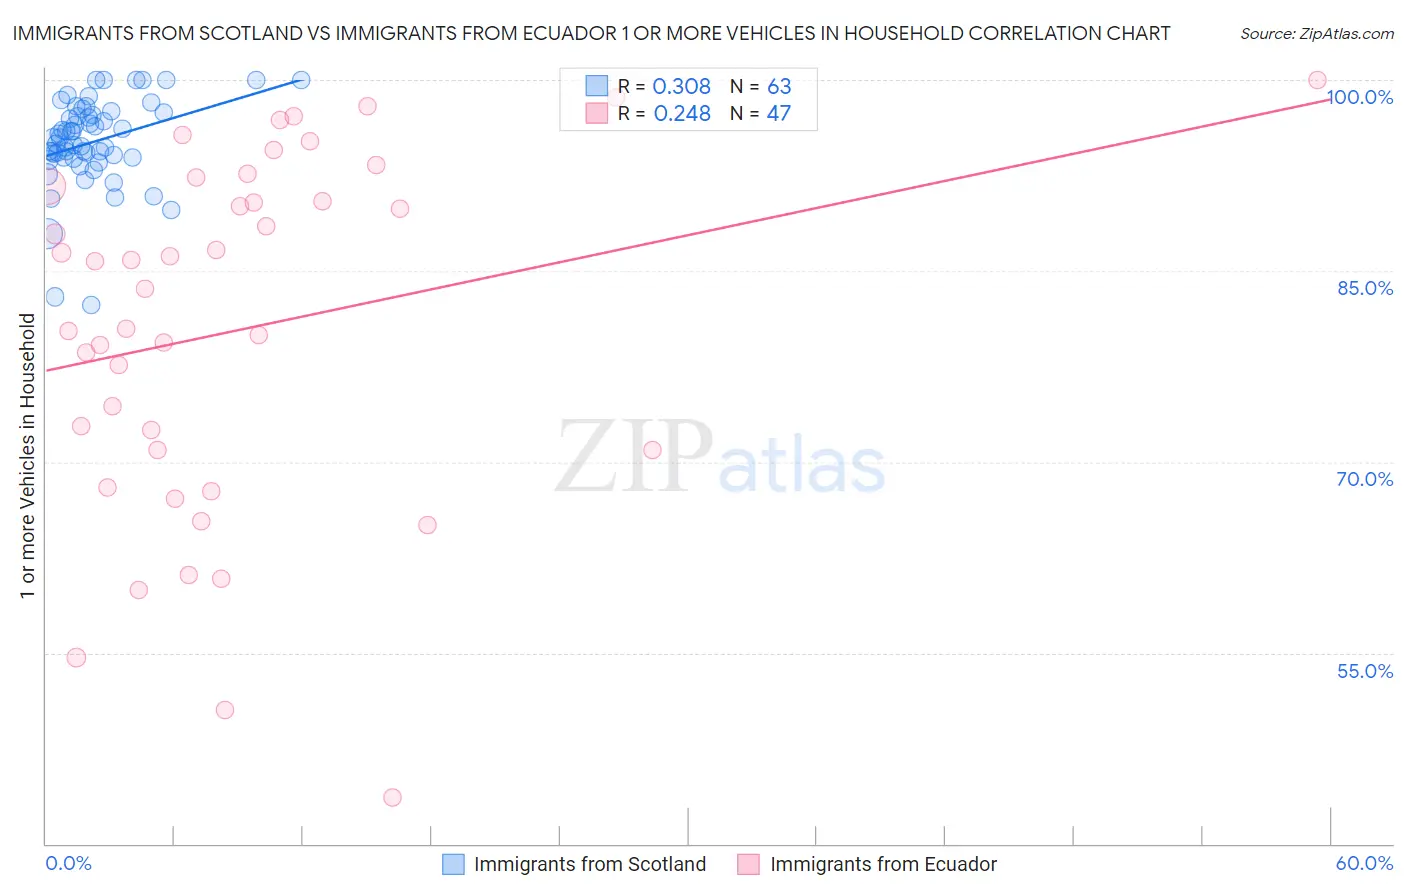 Immigrants from Scotland vs Immigrants from Ecuador 1 or more Vehicles in Household